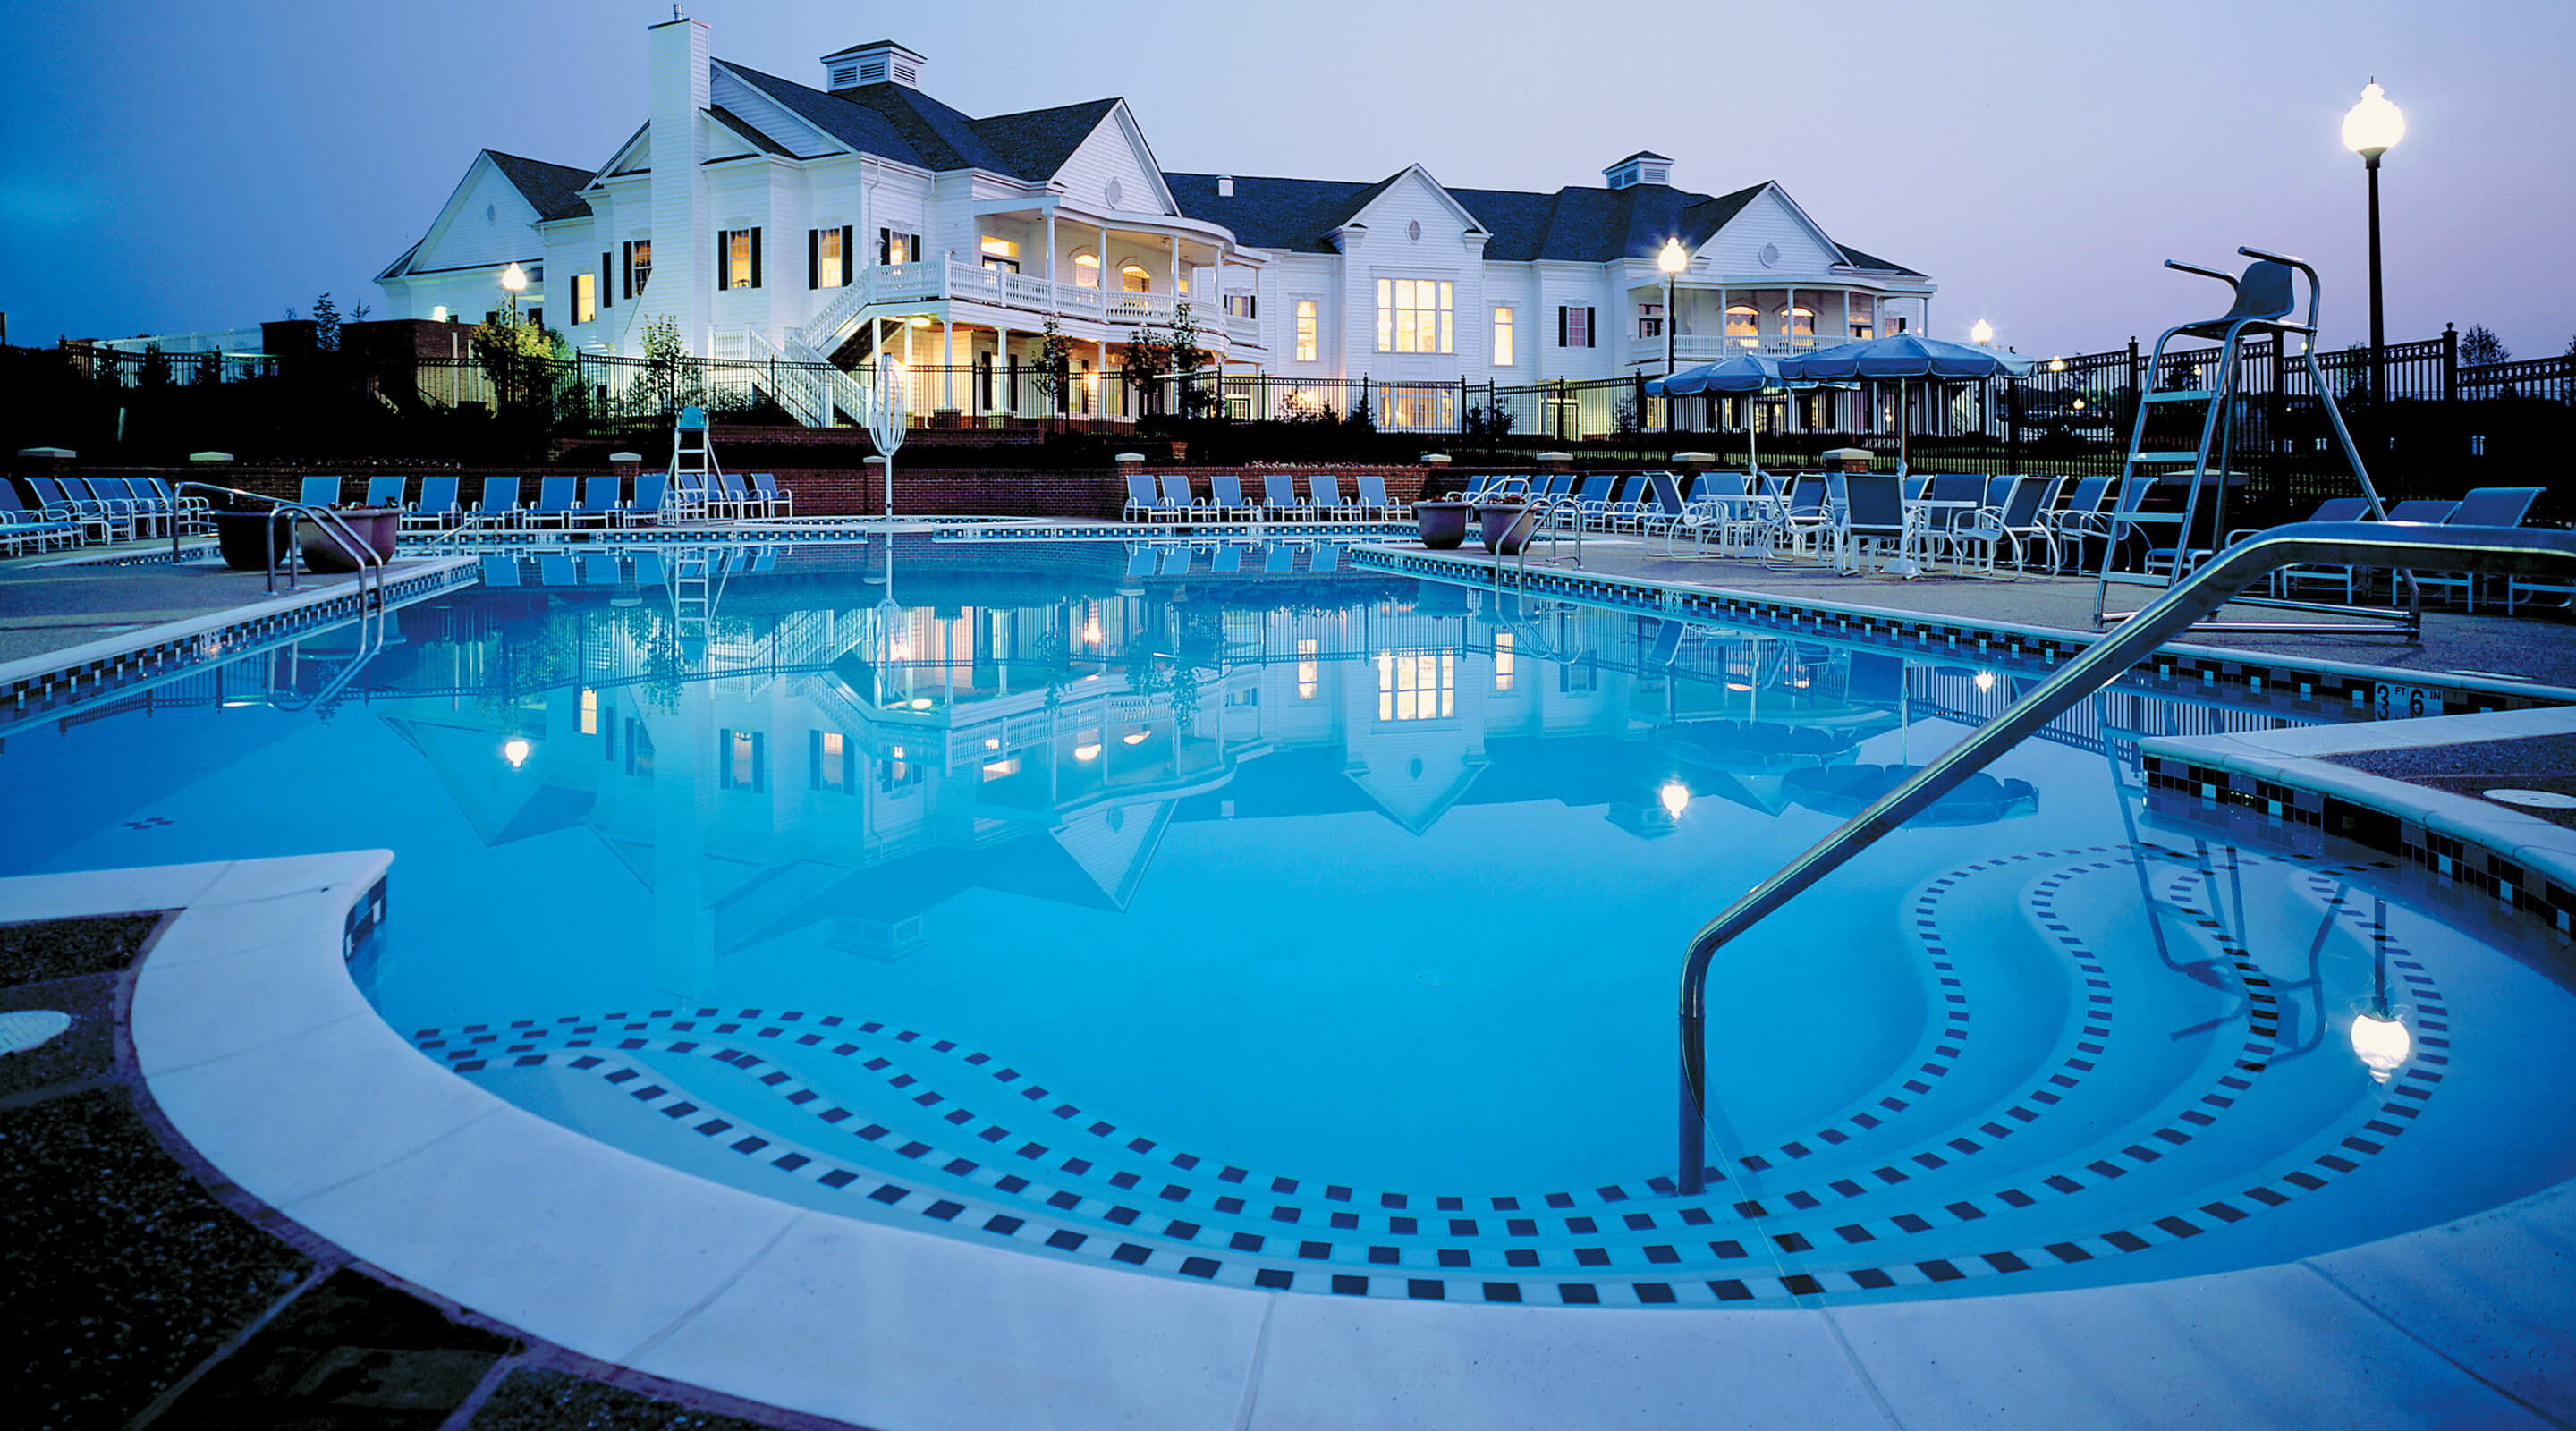 Clubhouse pool at dawn